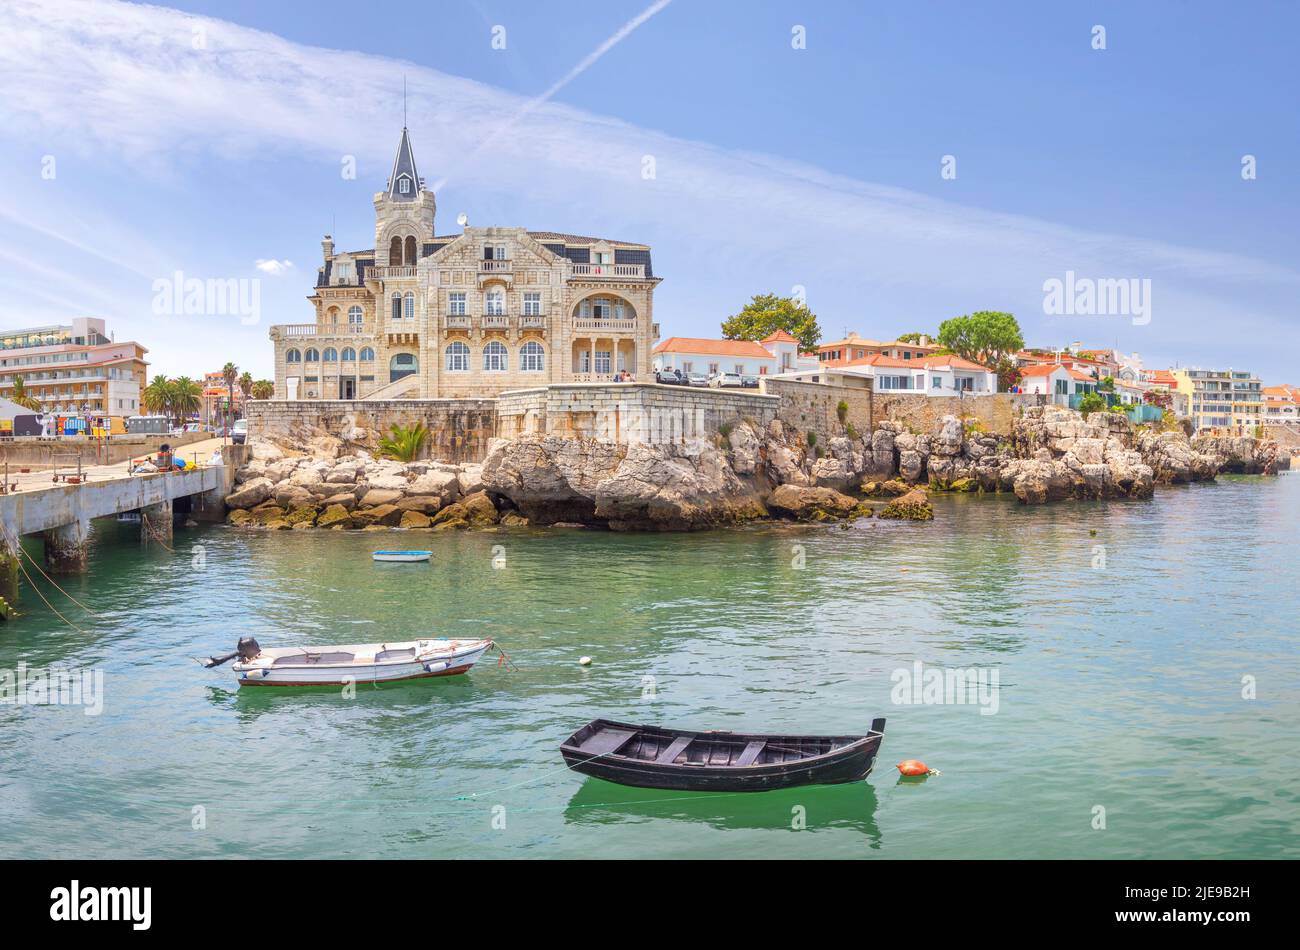 Cascais near Lisbon, seaside town. The house in the center is the Seixas Palace, built on the ocean at the beginning of the 20th century. Portugal Stock Photo